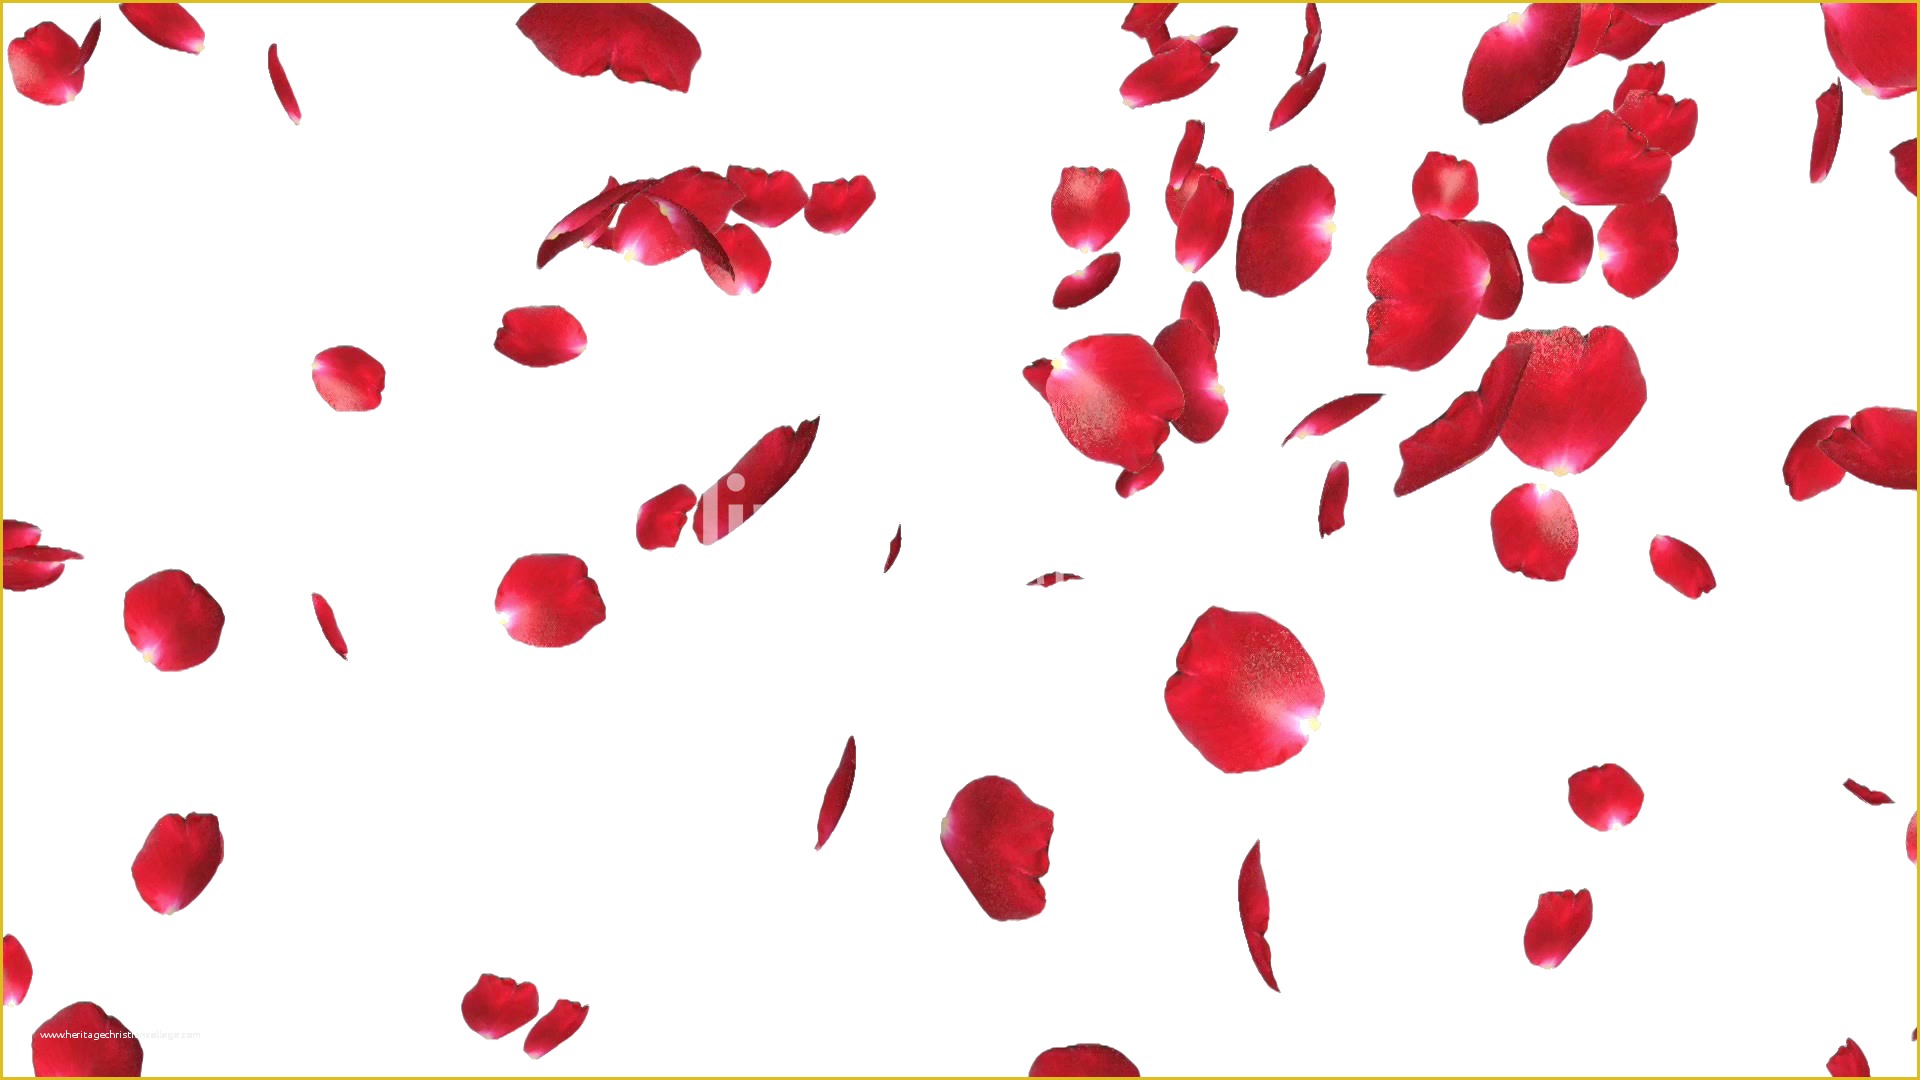 Falling Flower Petals after Effects Template Free Of Free Rose Petals Png File Vector Clipart Psd Peoplepng